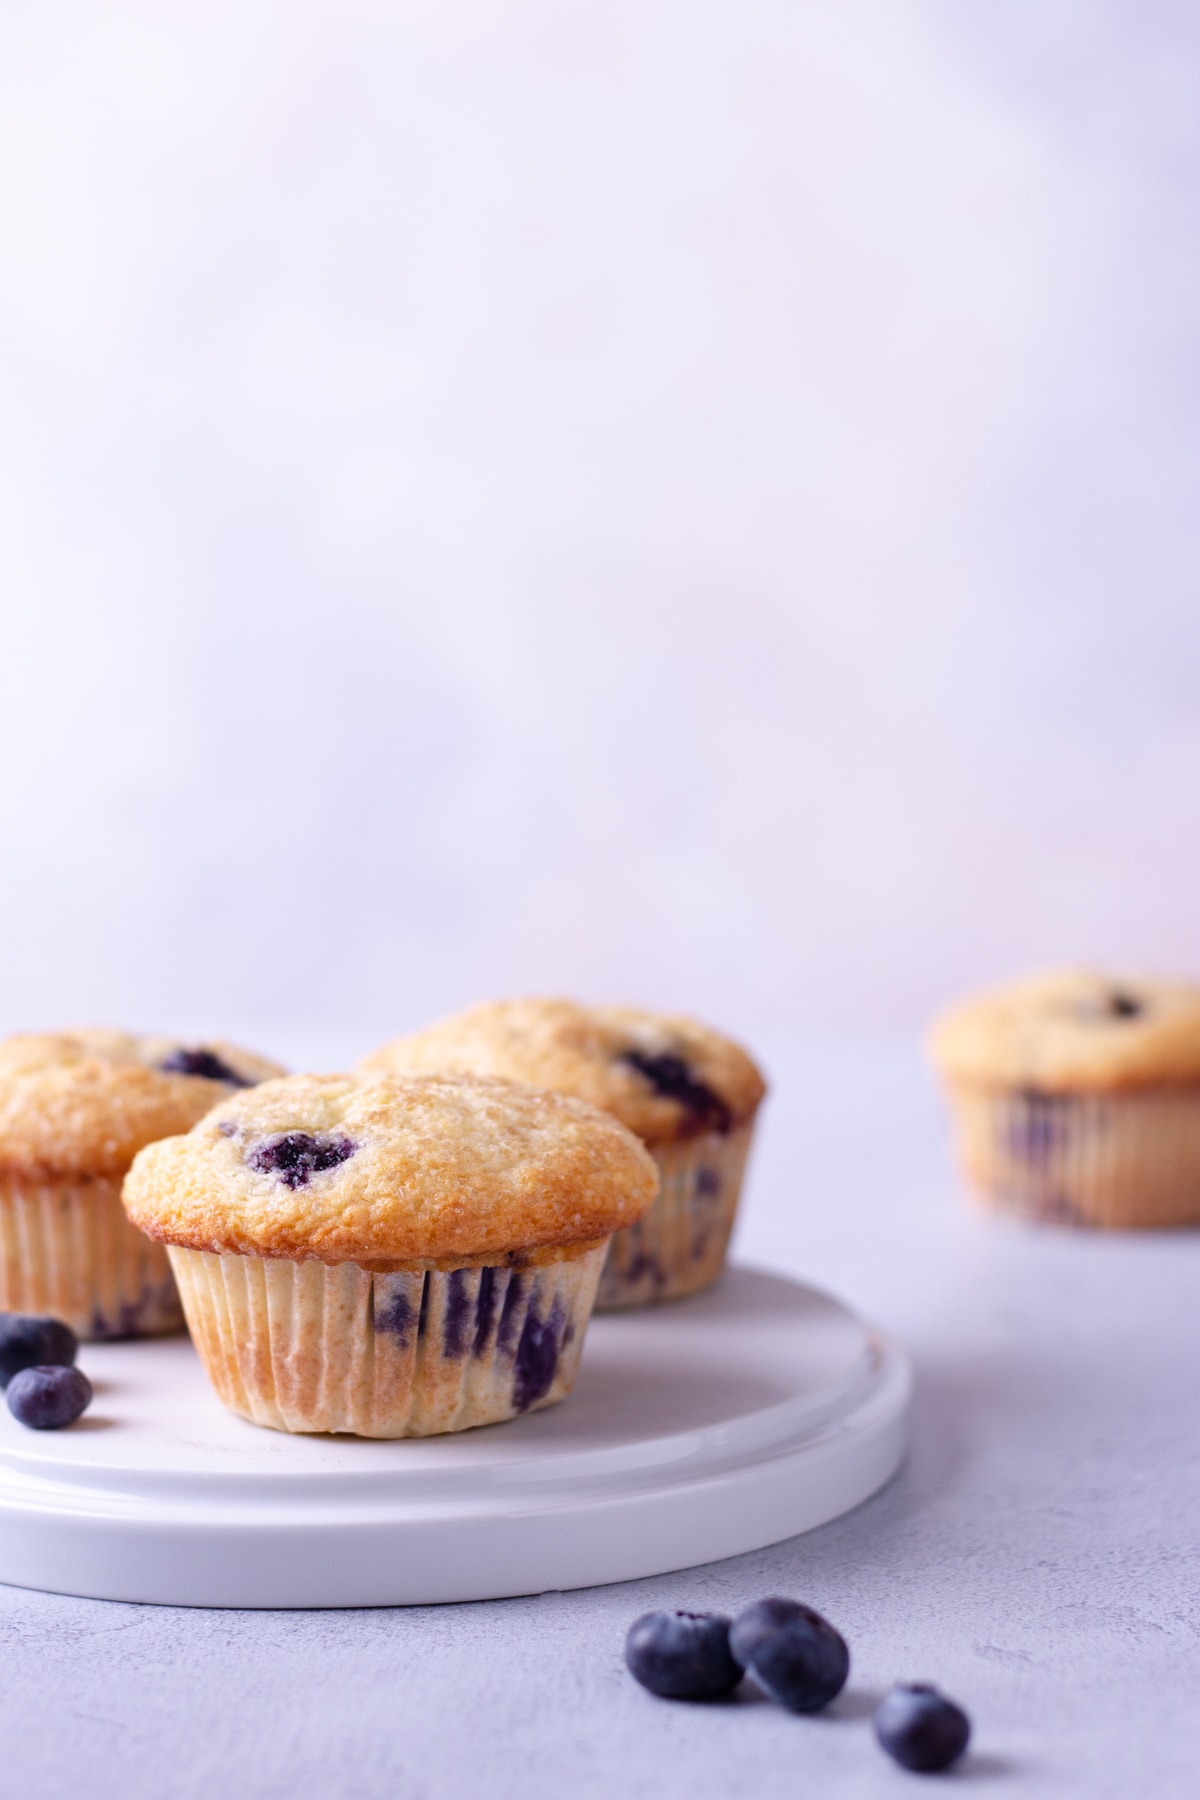 Straight on shot of a plate of Buttermilk Blueberry Muffins with a light blue background.